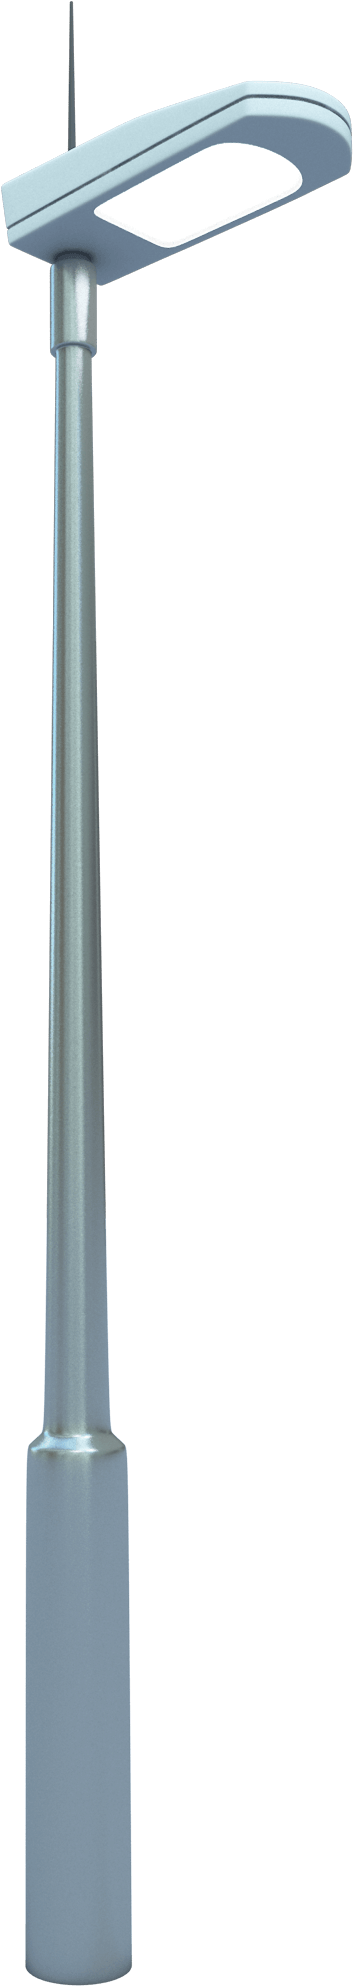 A Tall Silver Pole With A Black Background